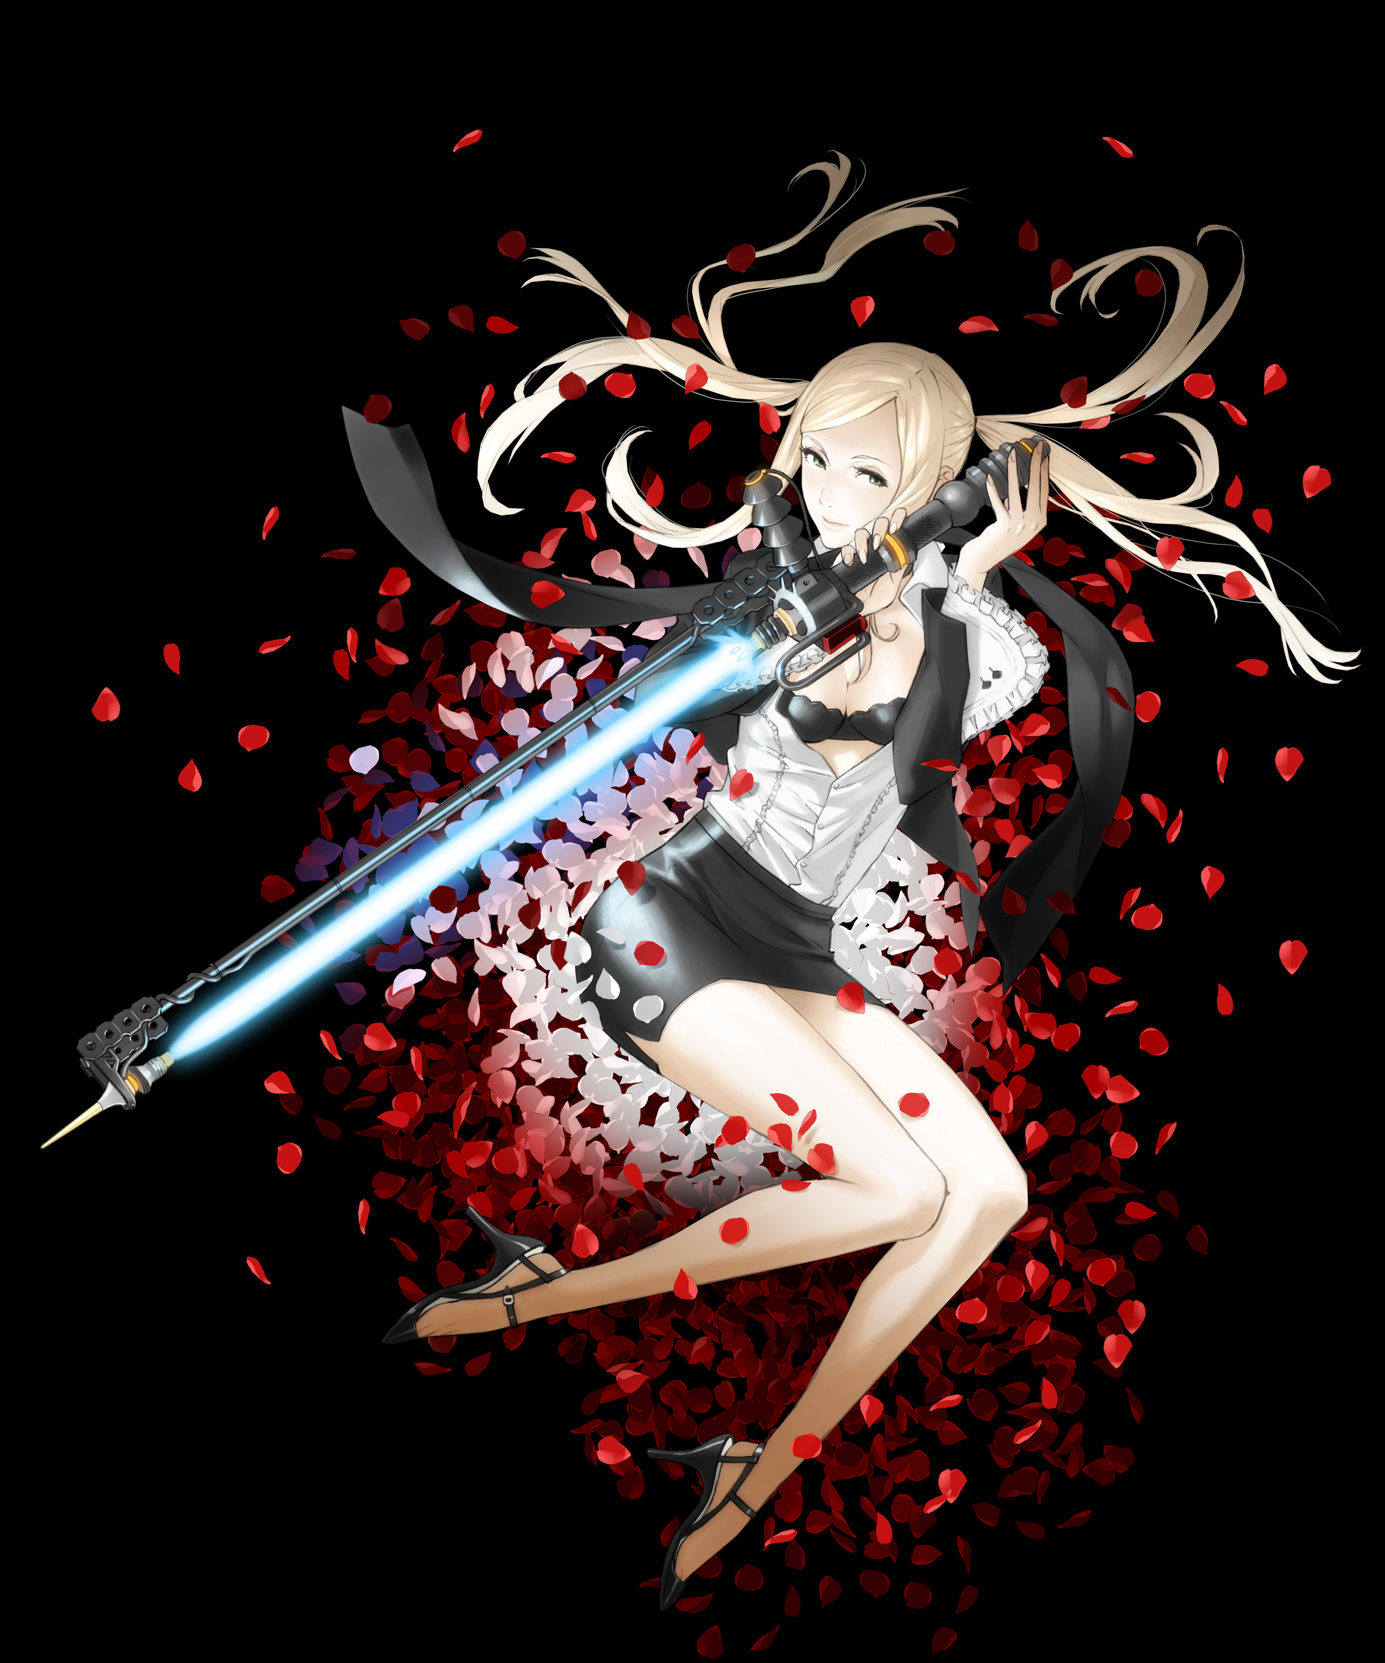 No More Heroes 3 Characters - Sylvia Christel - YouTube